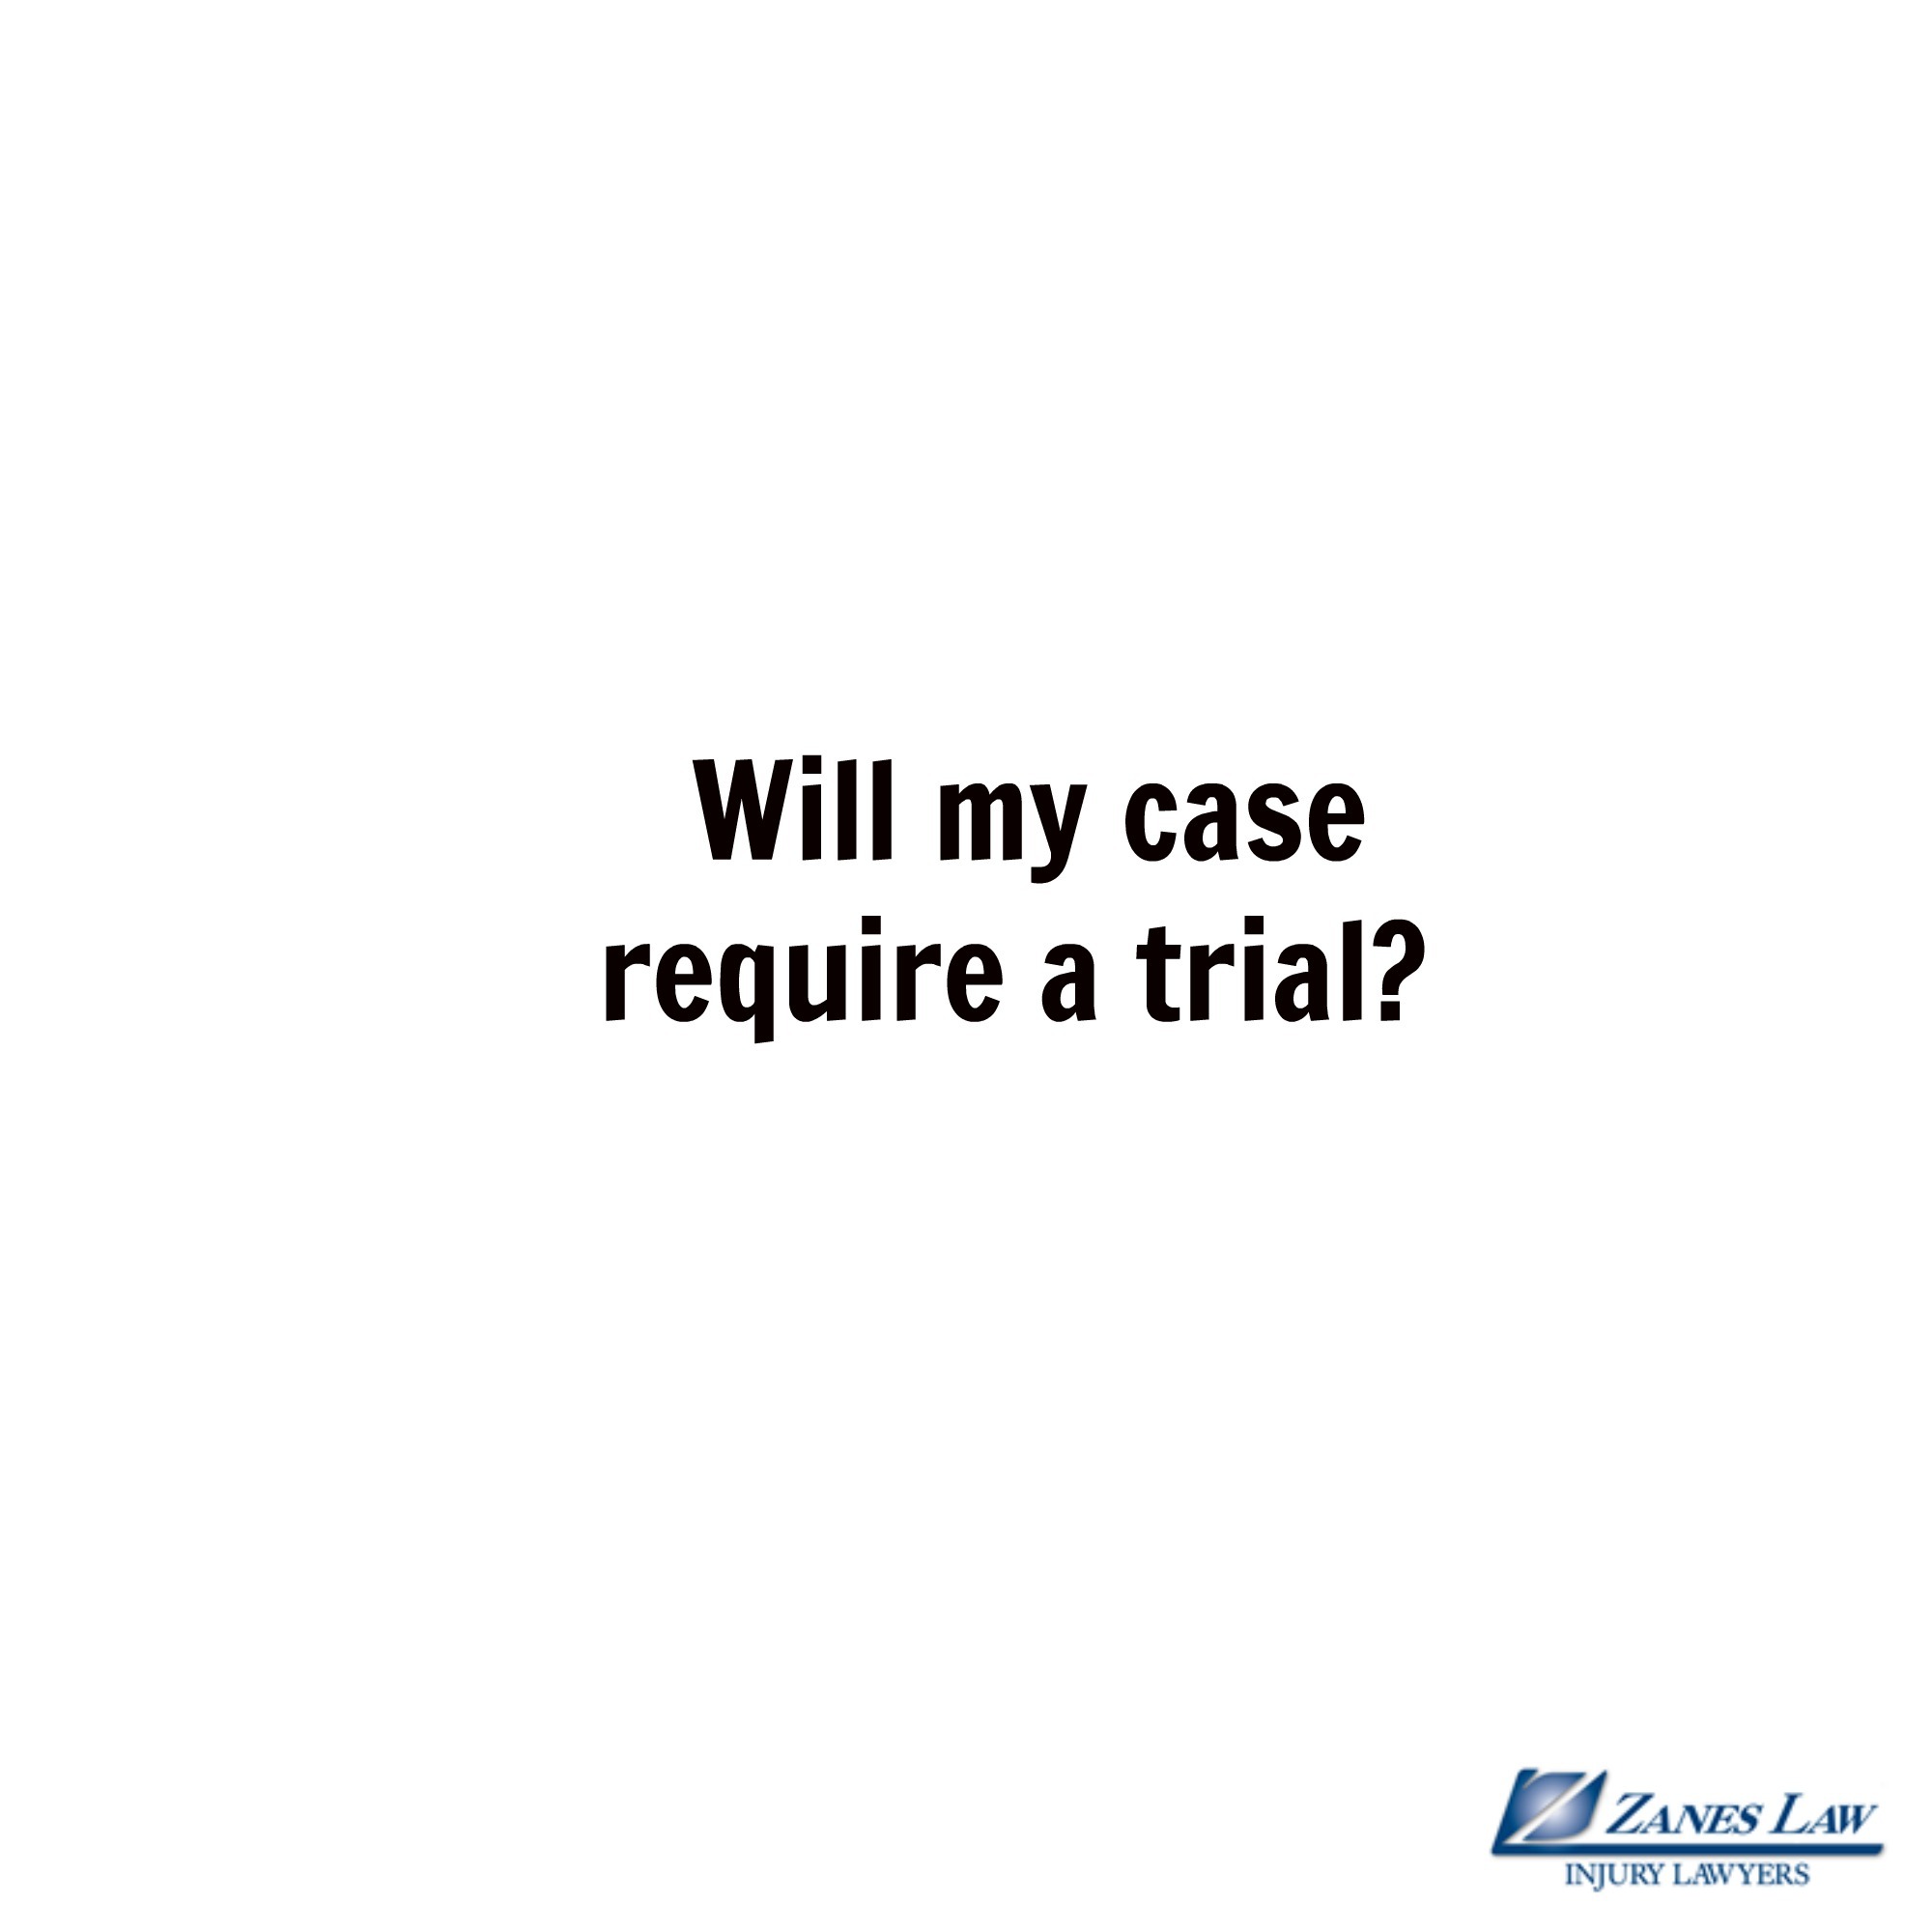 If I Hire an Attorney, will My Case Require a Trial?